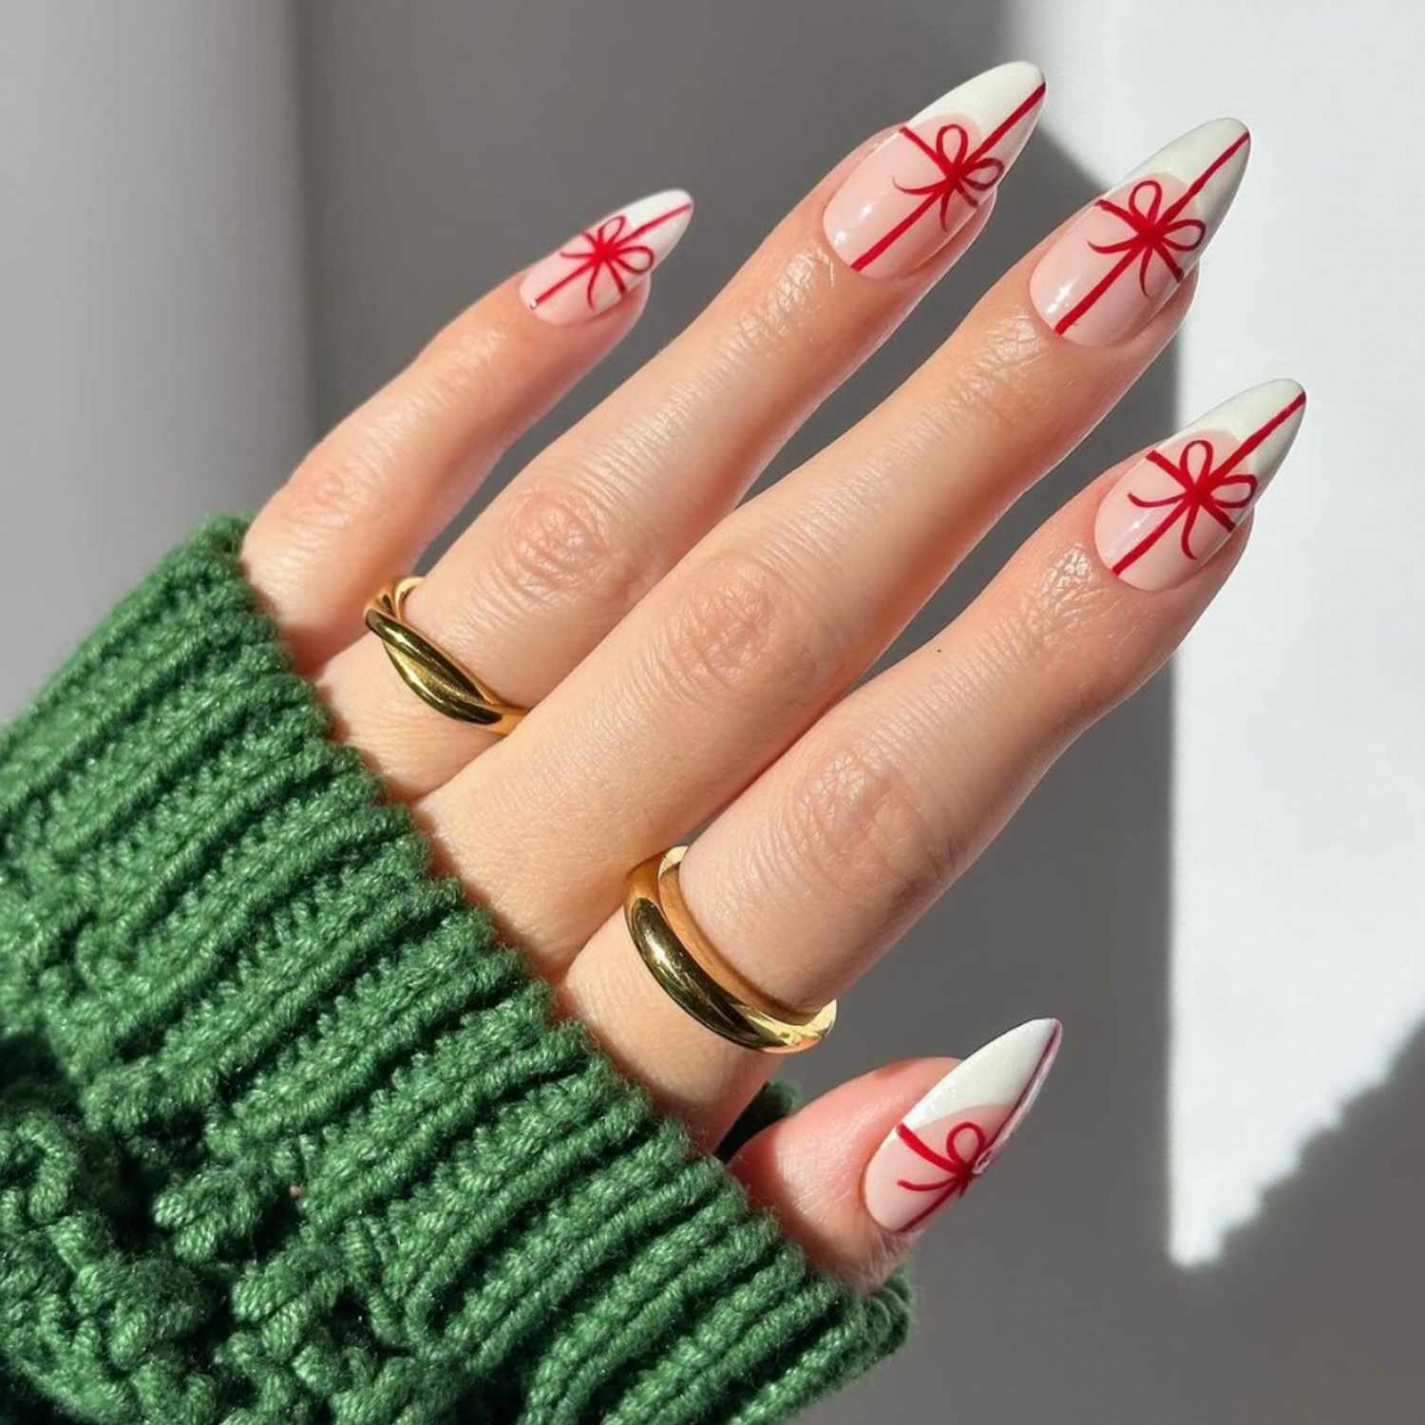 Christmas Nail Ideas to Ring in the Holiday Spirit